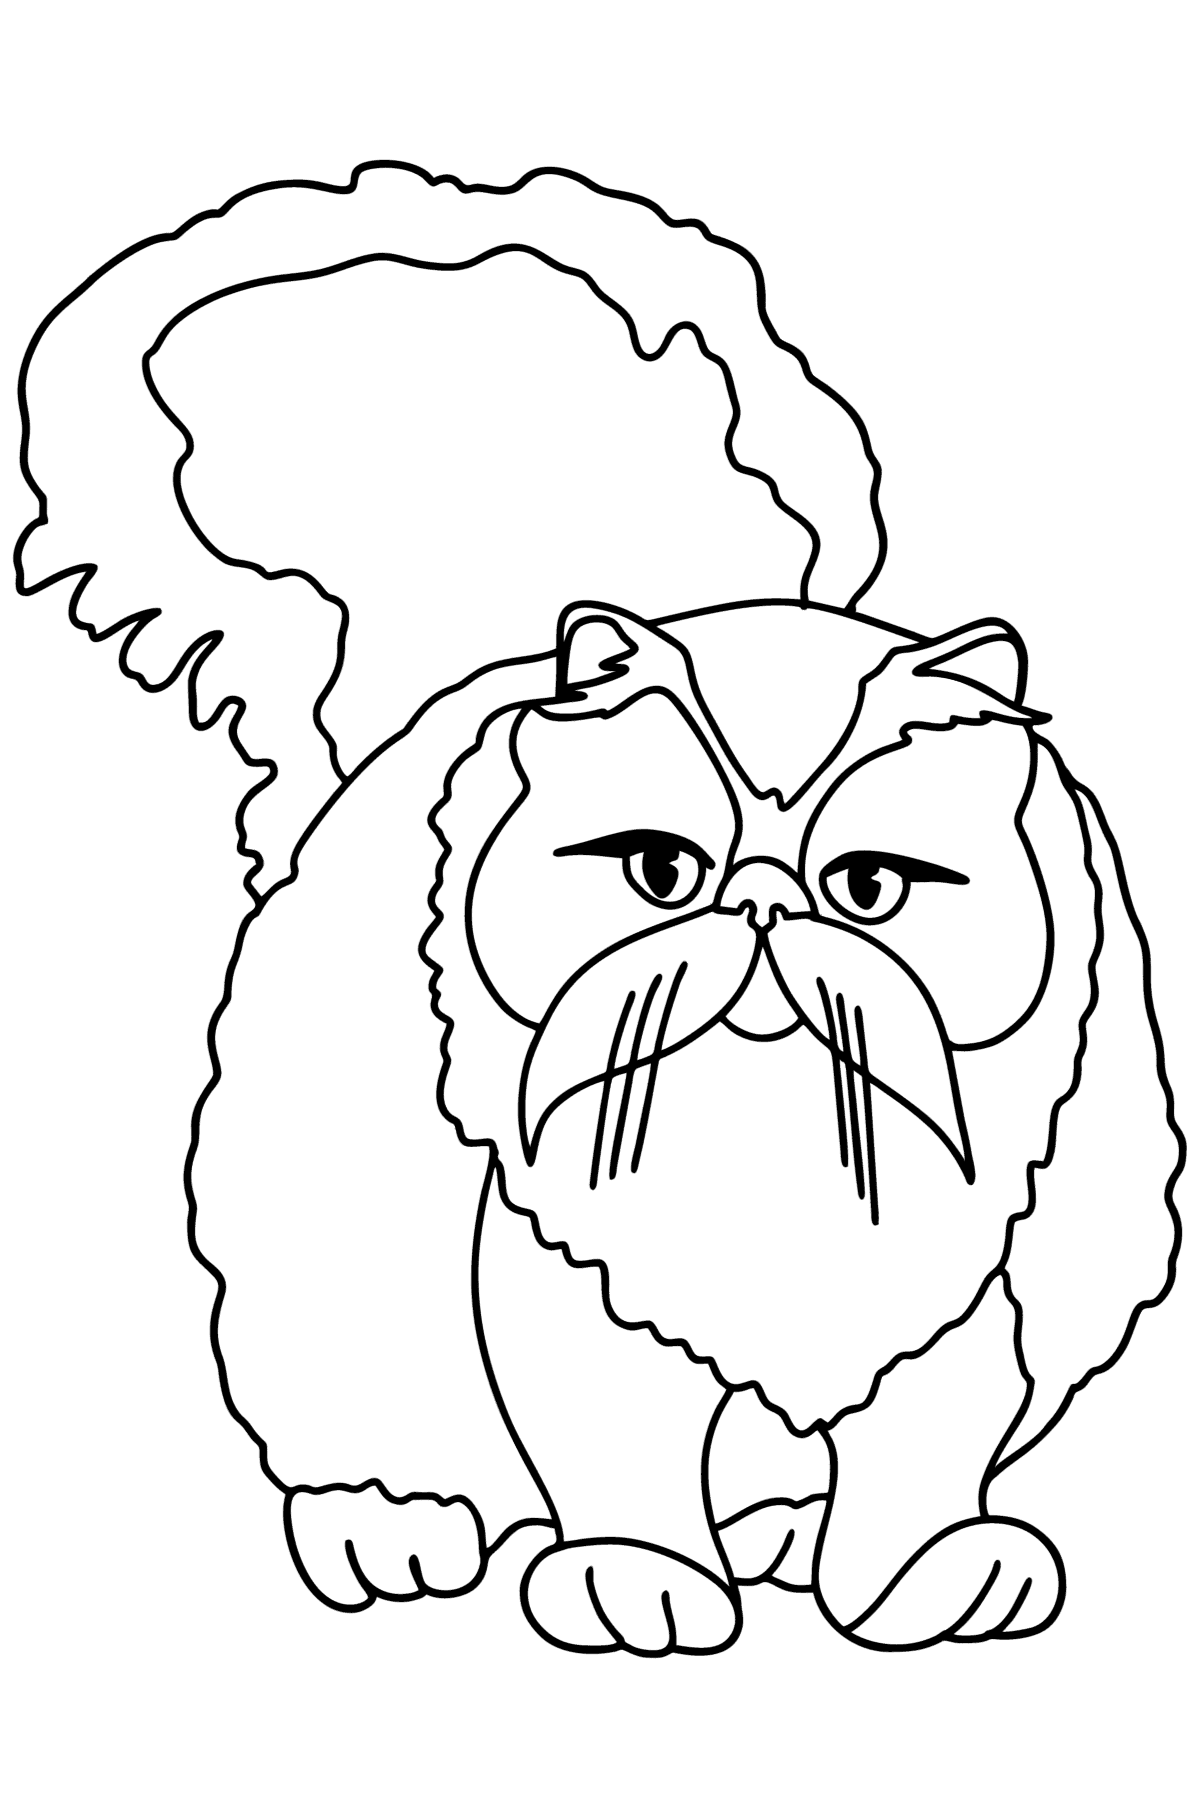 Persian Cat coloring page - Coloring Pages for Kids